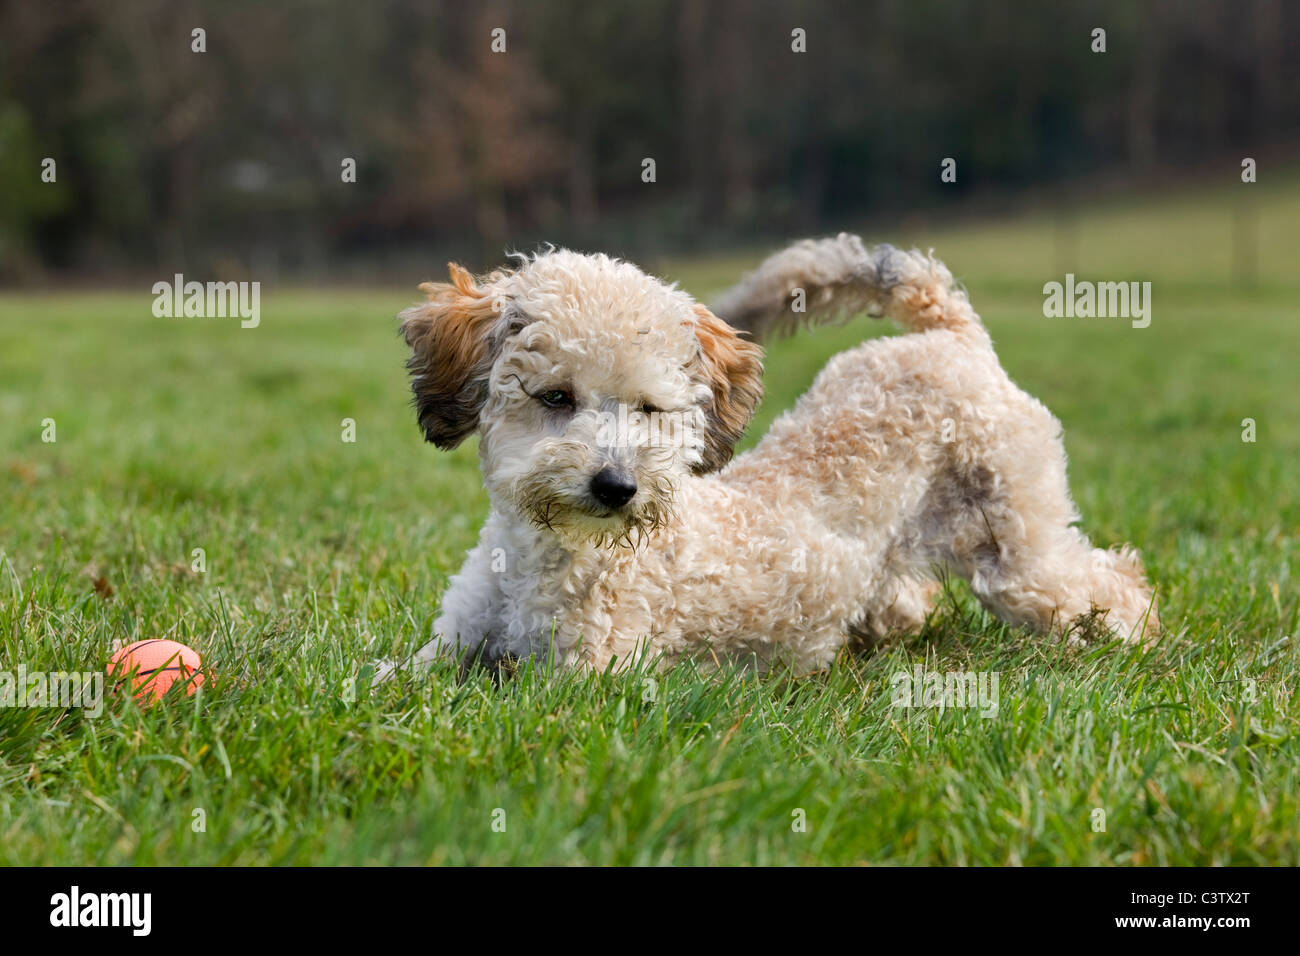 Standard poodle (Canis lupus familiaris) pup playing with ball in garden Stock Photo